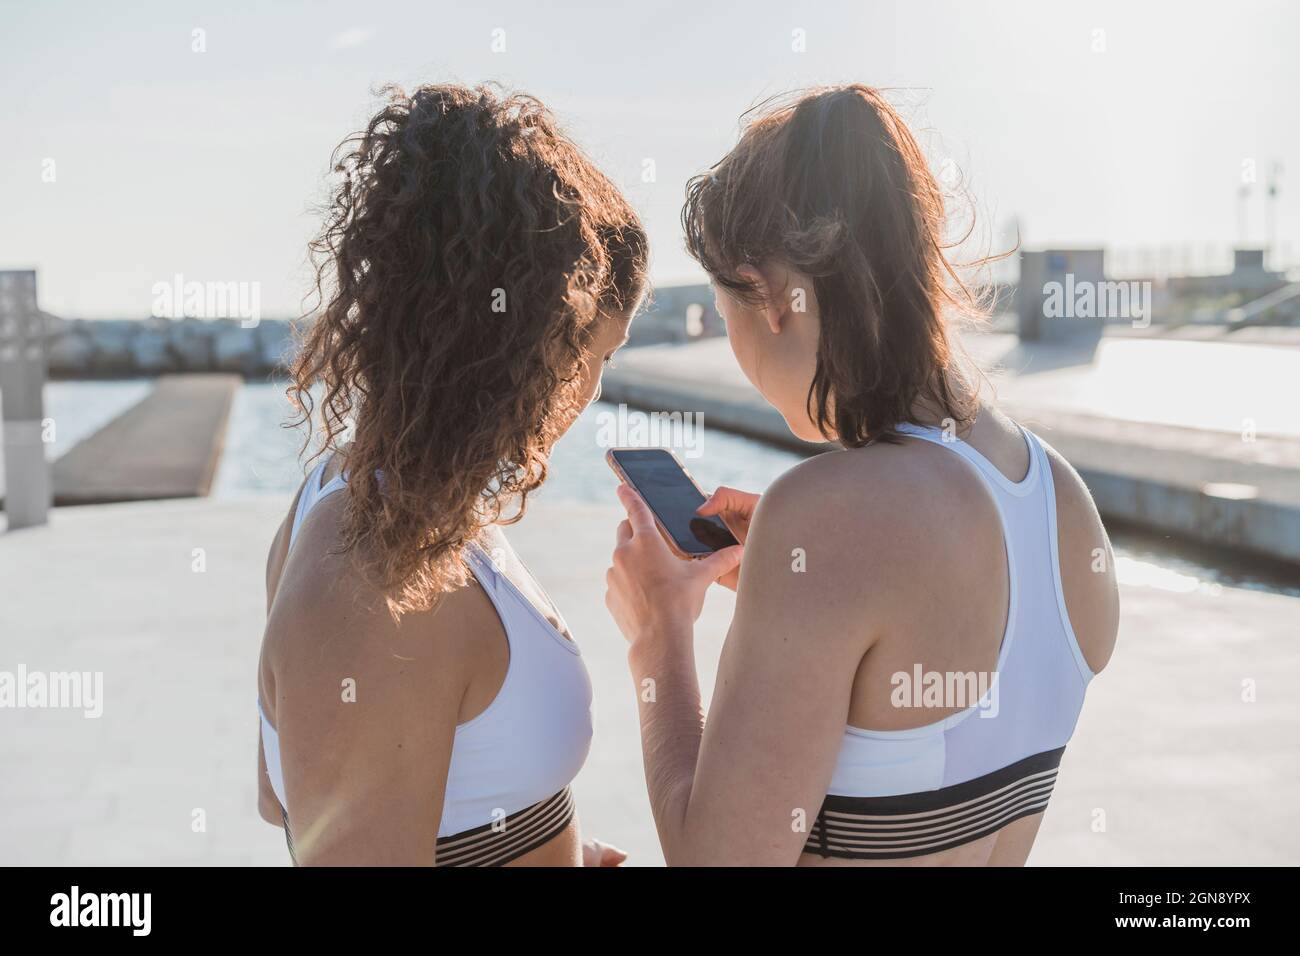 Women in sports clothing using smart phone Stock Photo